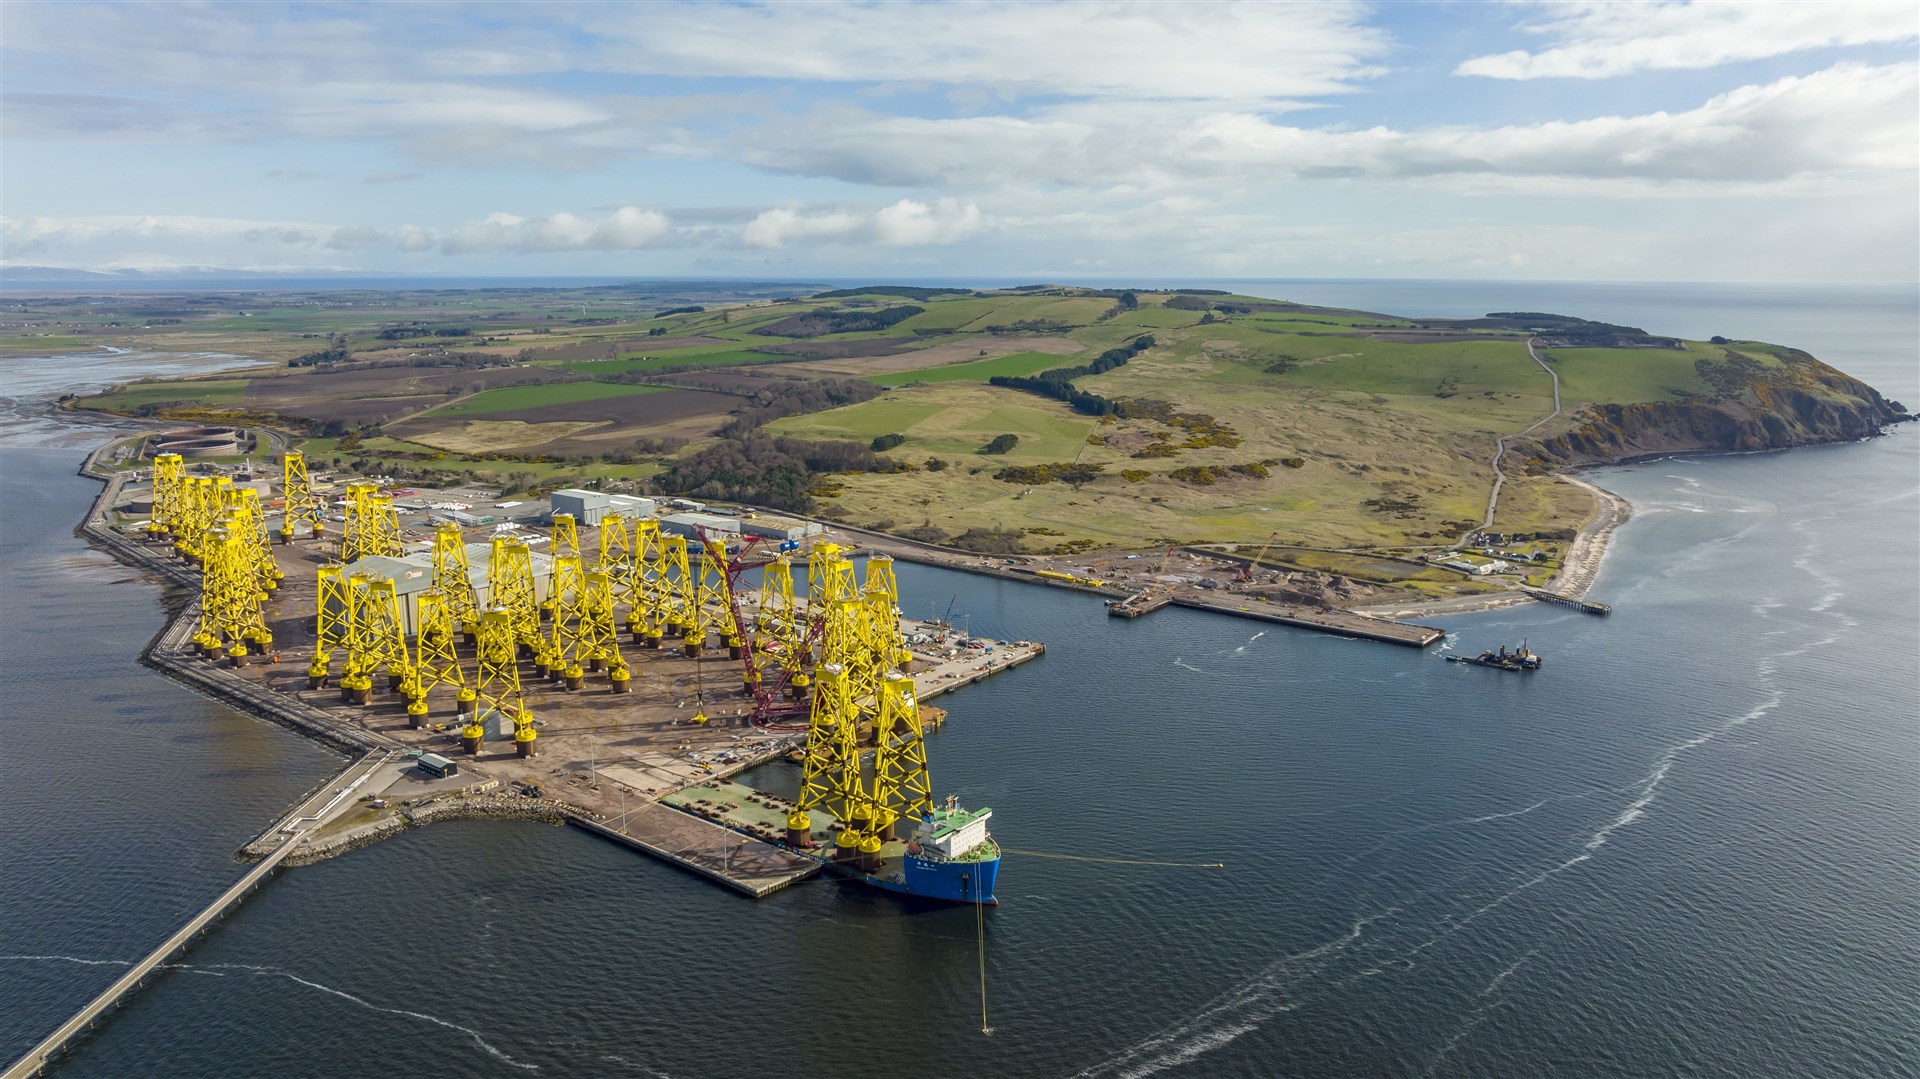 Port of Nigg on Cromarty Firth.